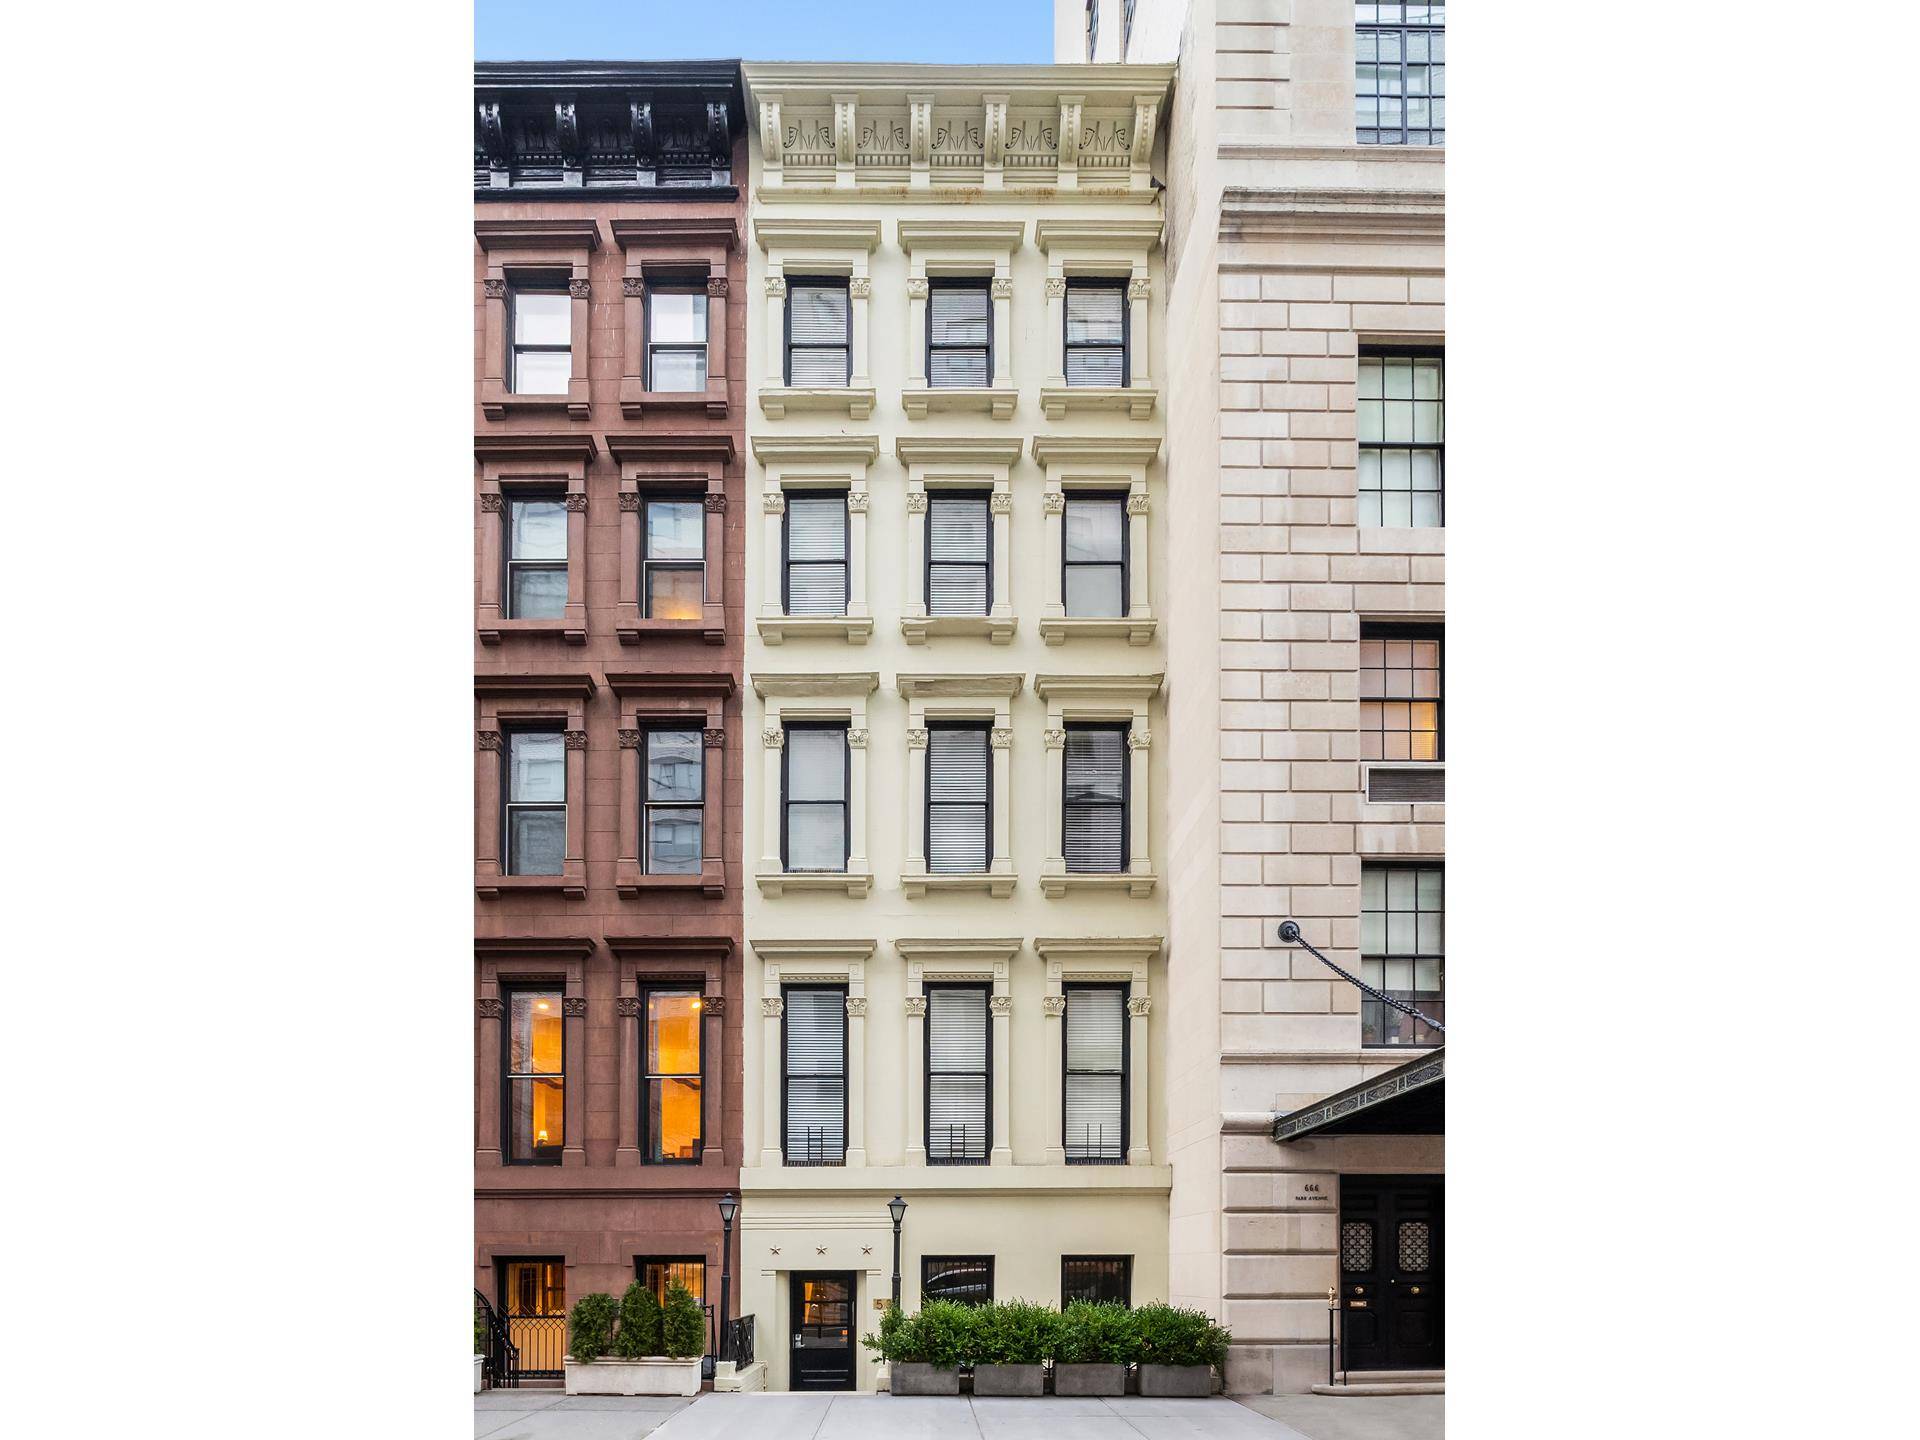 Located between Park and Madison Avenue in the heart of the Upper East Side Historic District, 53 East 67th Street is a 20 foot wide, 5 story town home facing ...